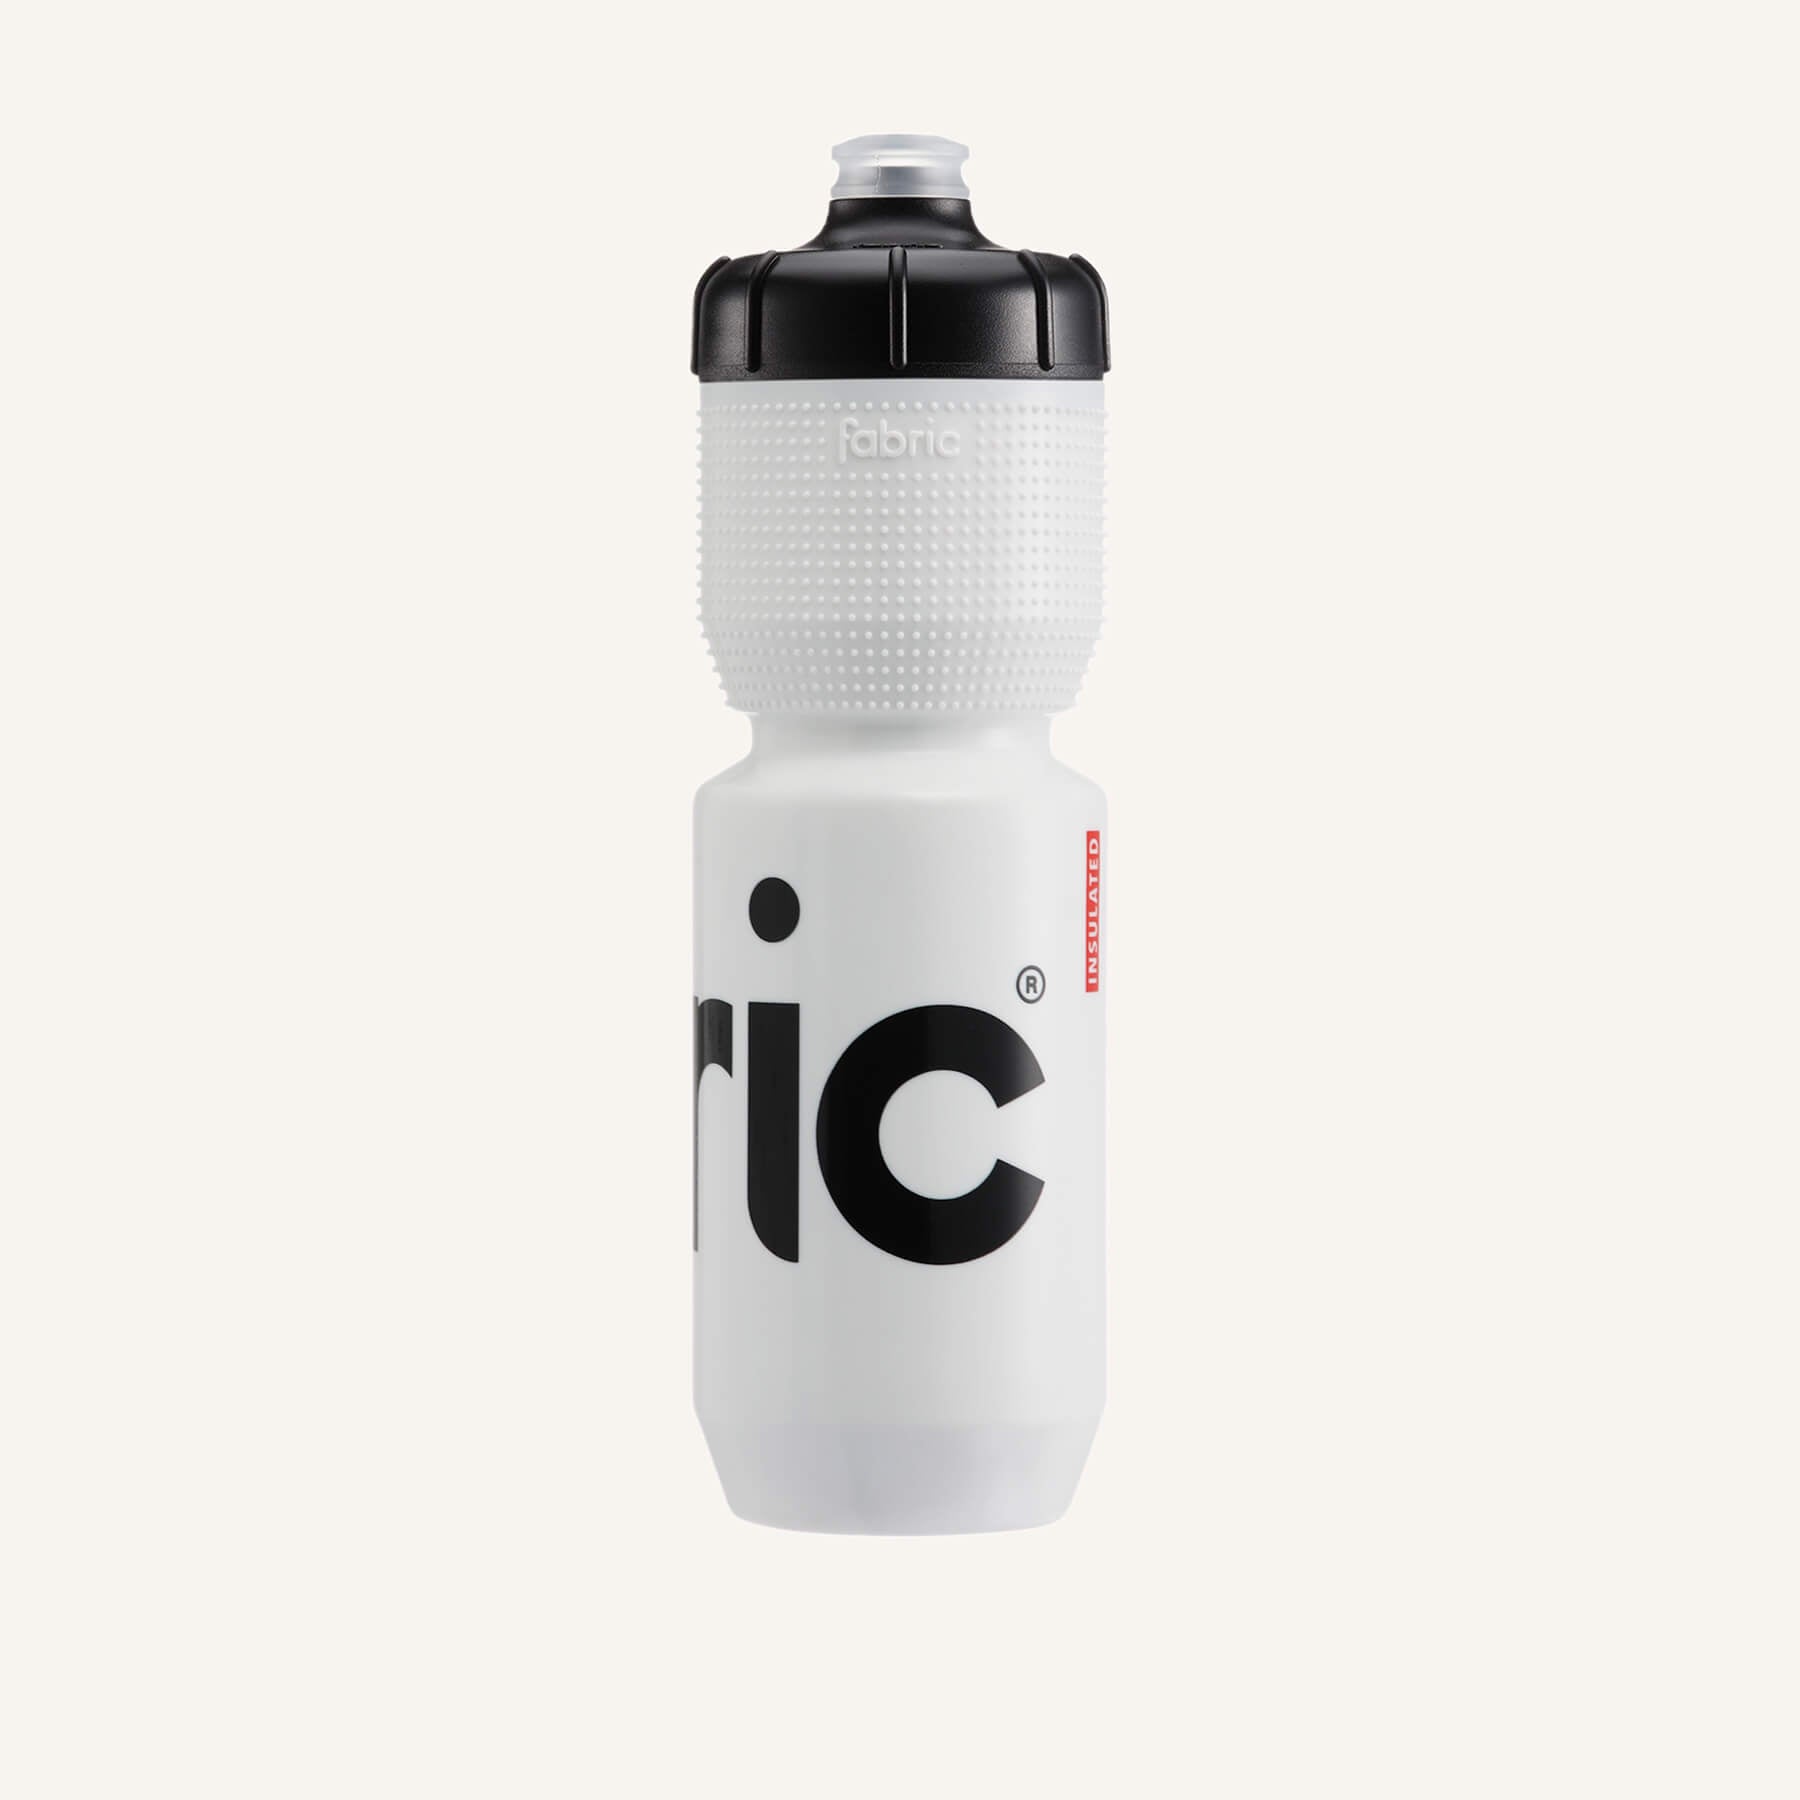 fabric gripper water bottle cage